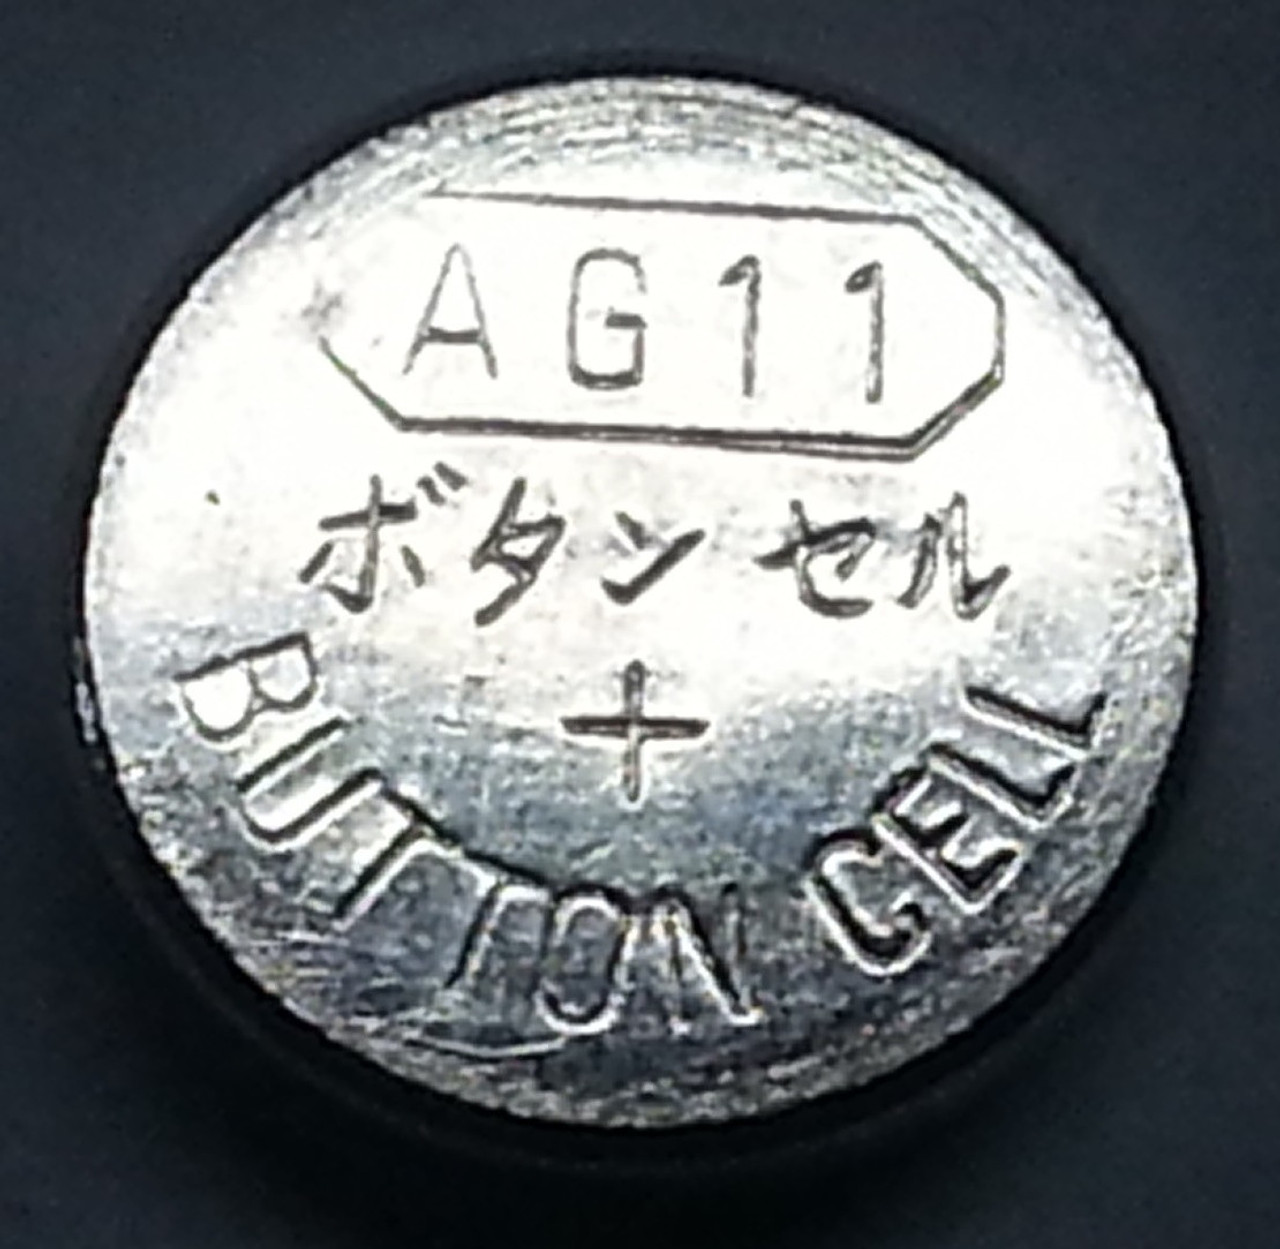 AG11 LR721 Alkaline Button Watch Battery 1.5V 100 Pack FREE SHIPPING  Brooklyn Battery Works